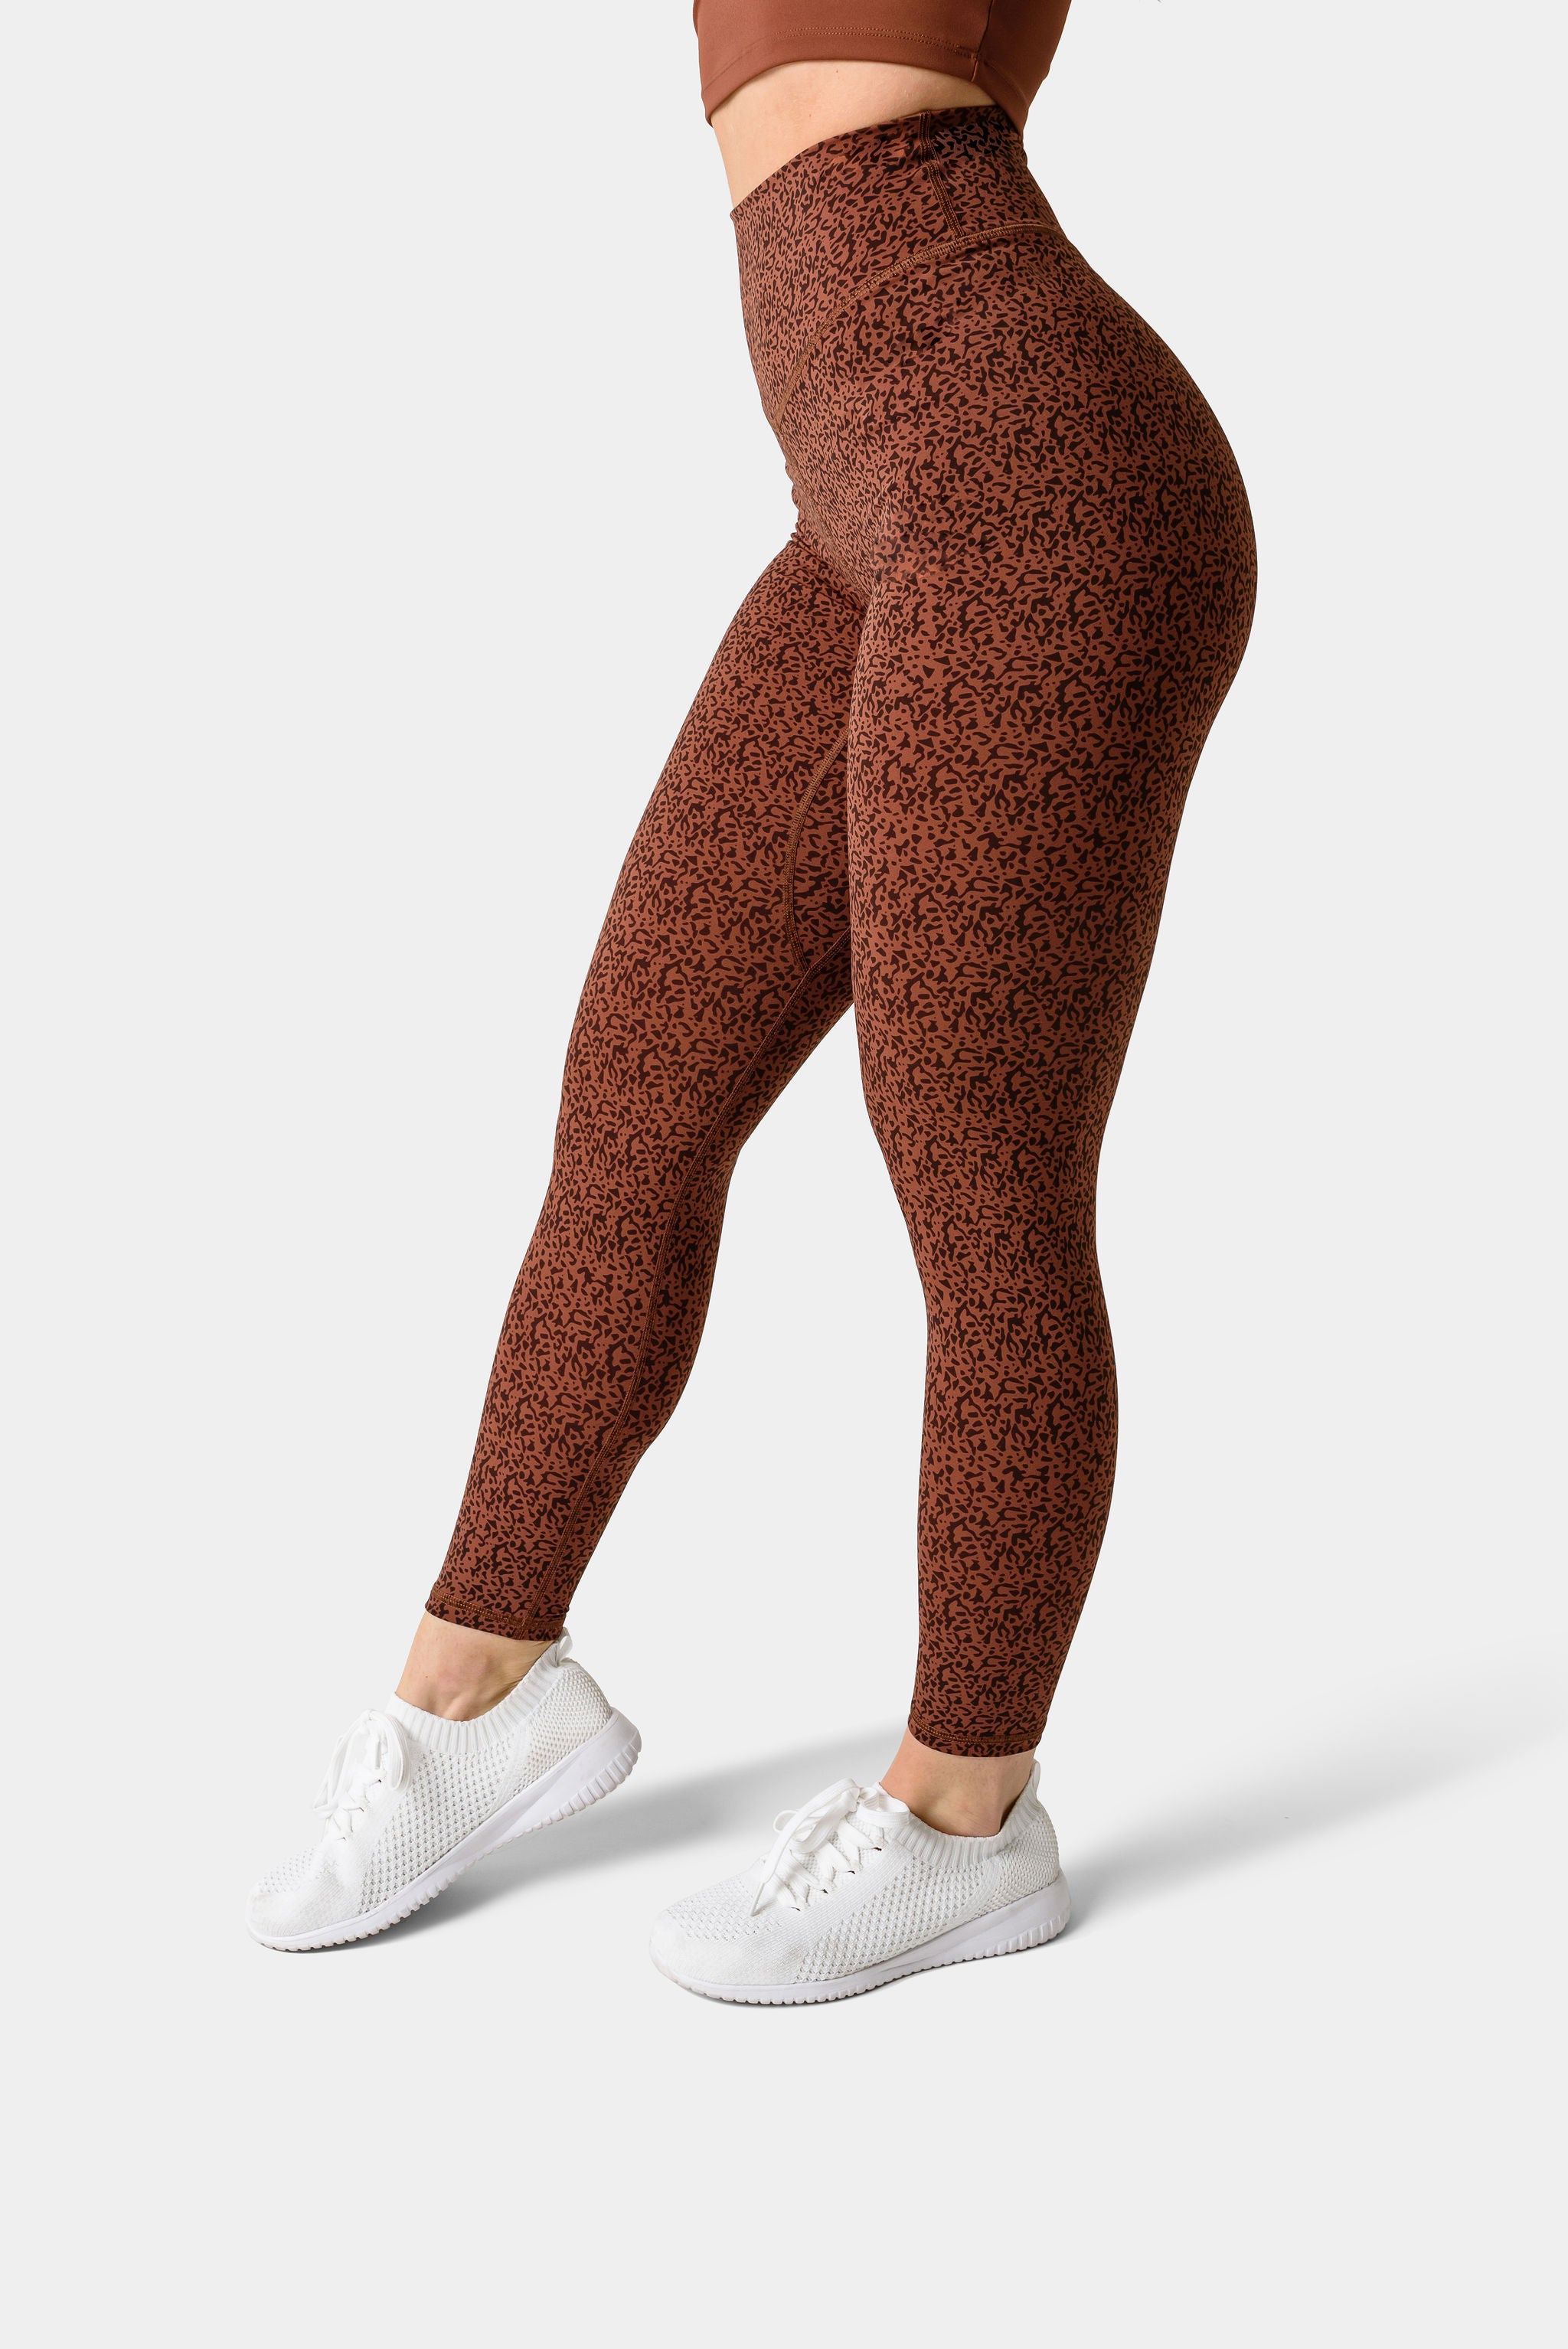 Kamo Fitness High Waisted Yoga Pants 25 Inseam Ellyn Leggings Butt Lifting  Tie Dye Soft Workout Tights, Downtown Brown, M : Buy Online at Best Price  in KSA - Souq is now